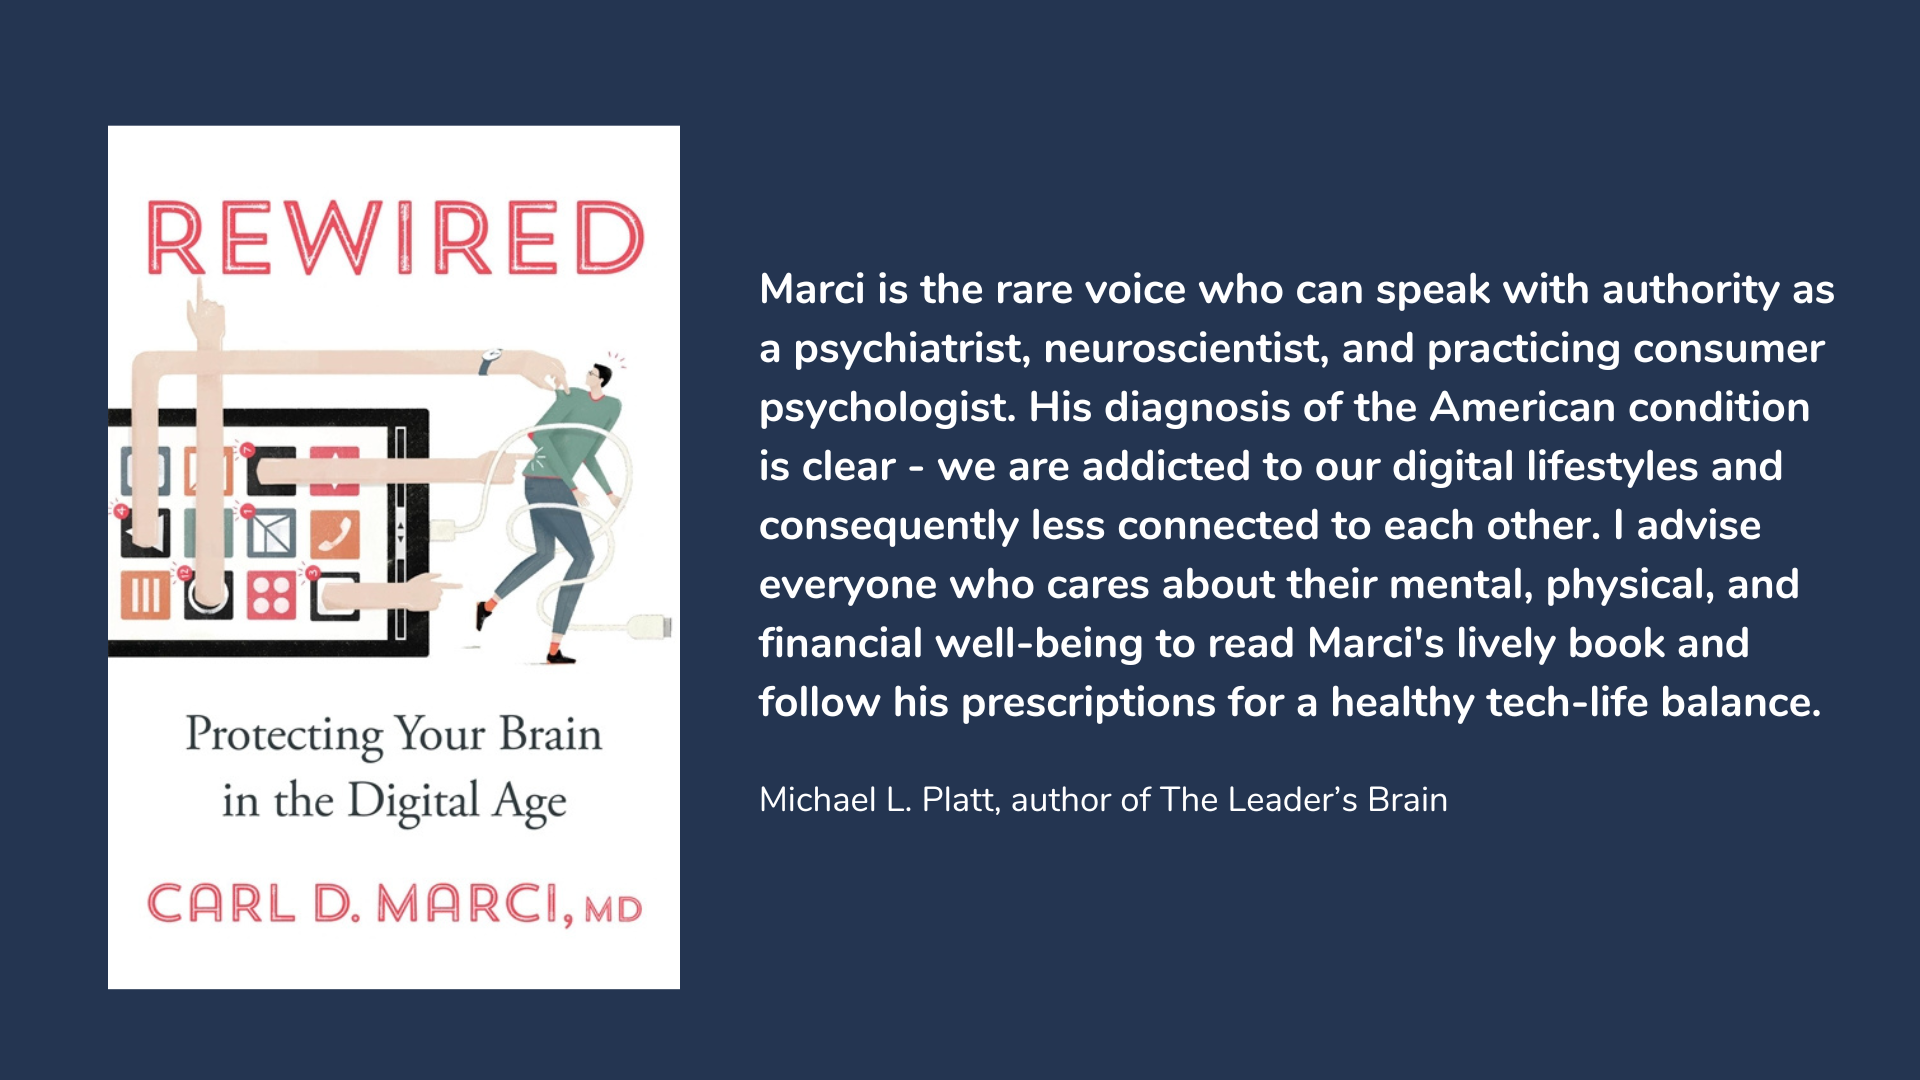 Rewired: Protecting Your Brain in the Digital Age, book cover and description.